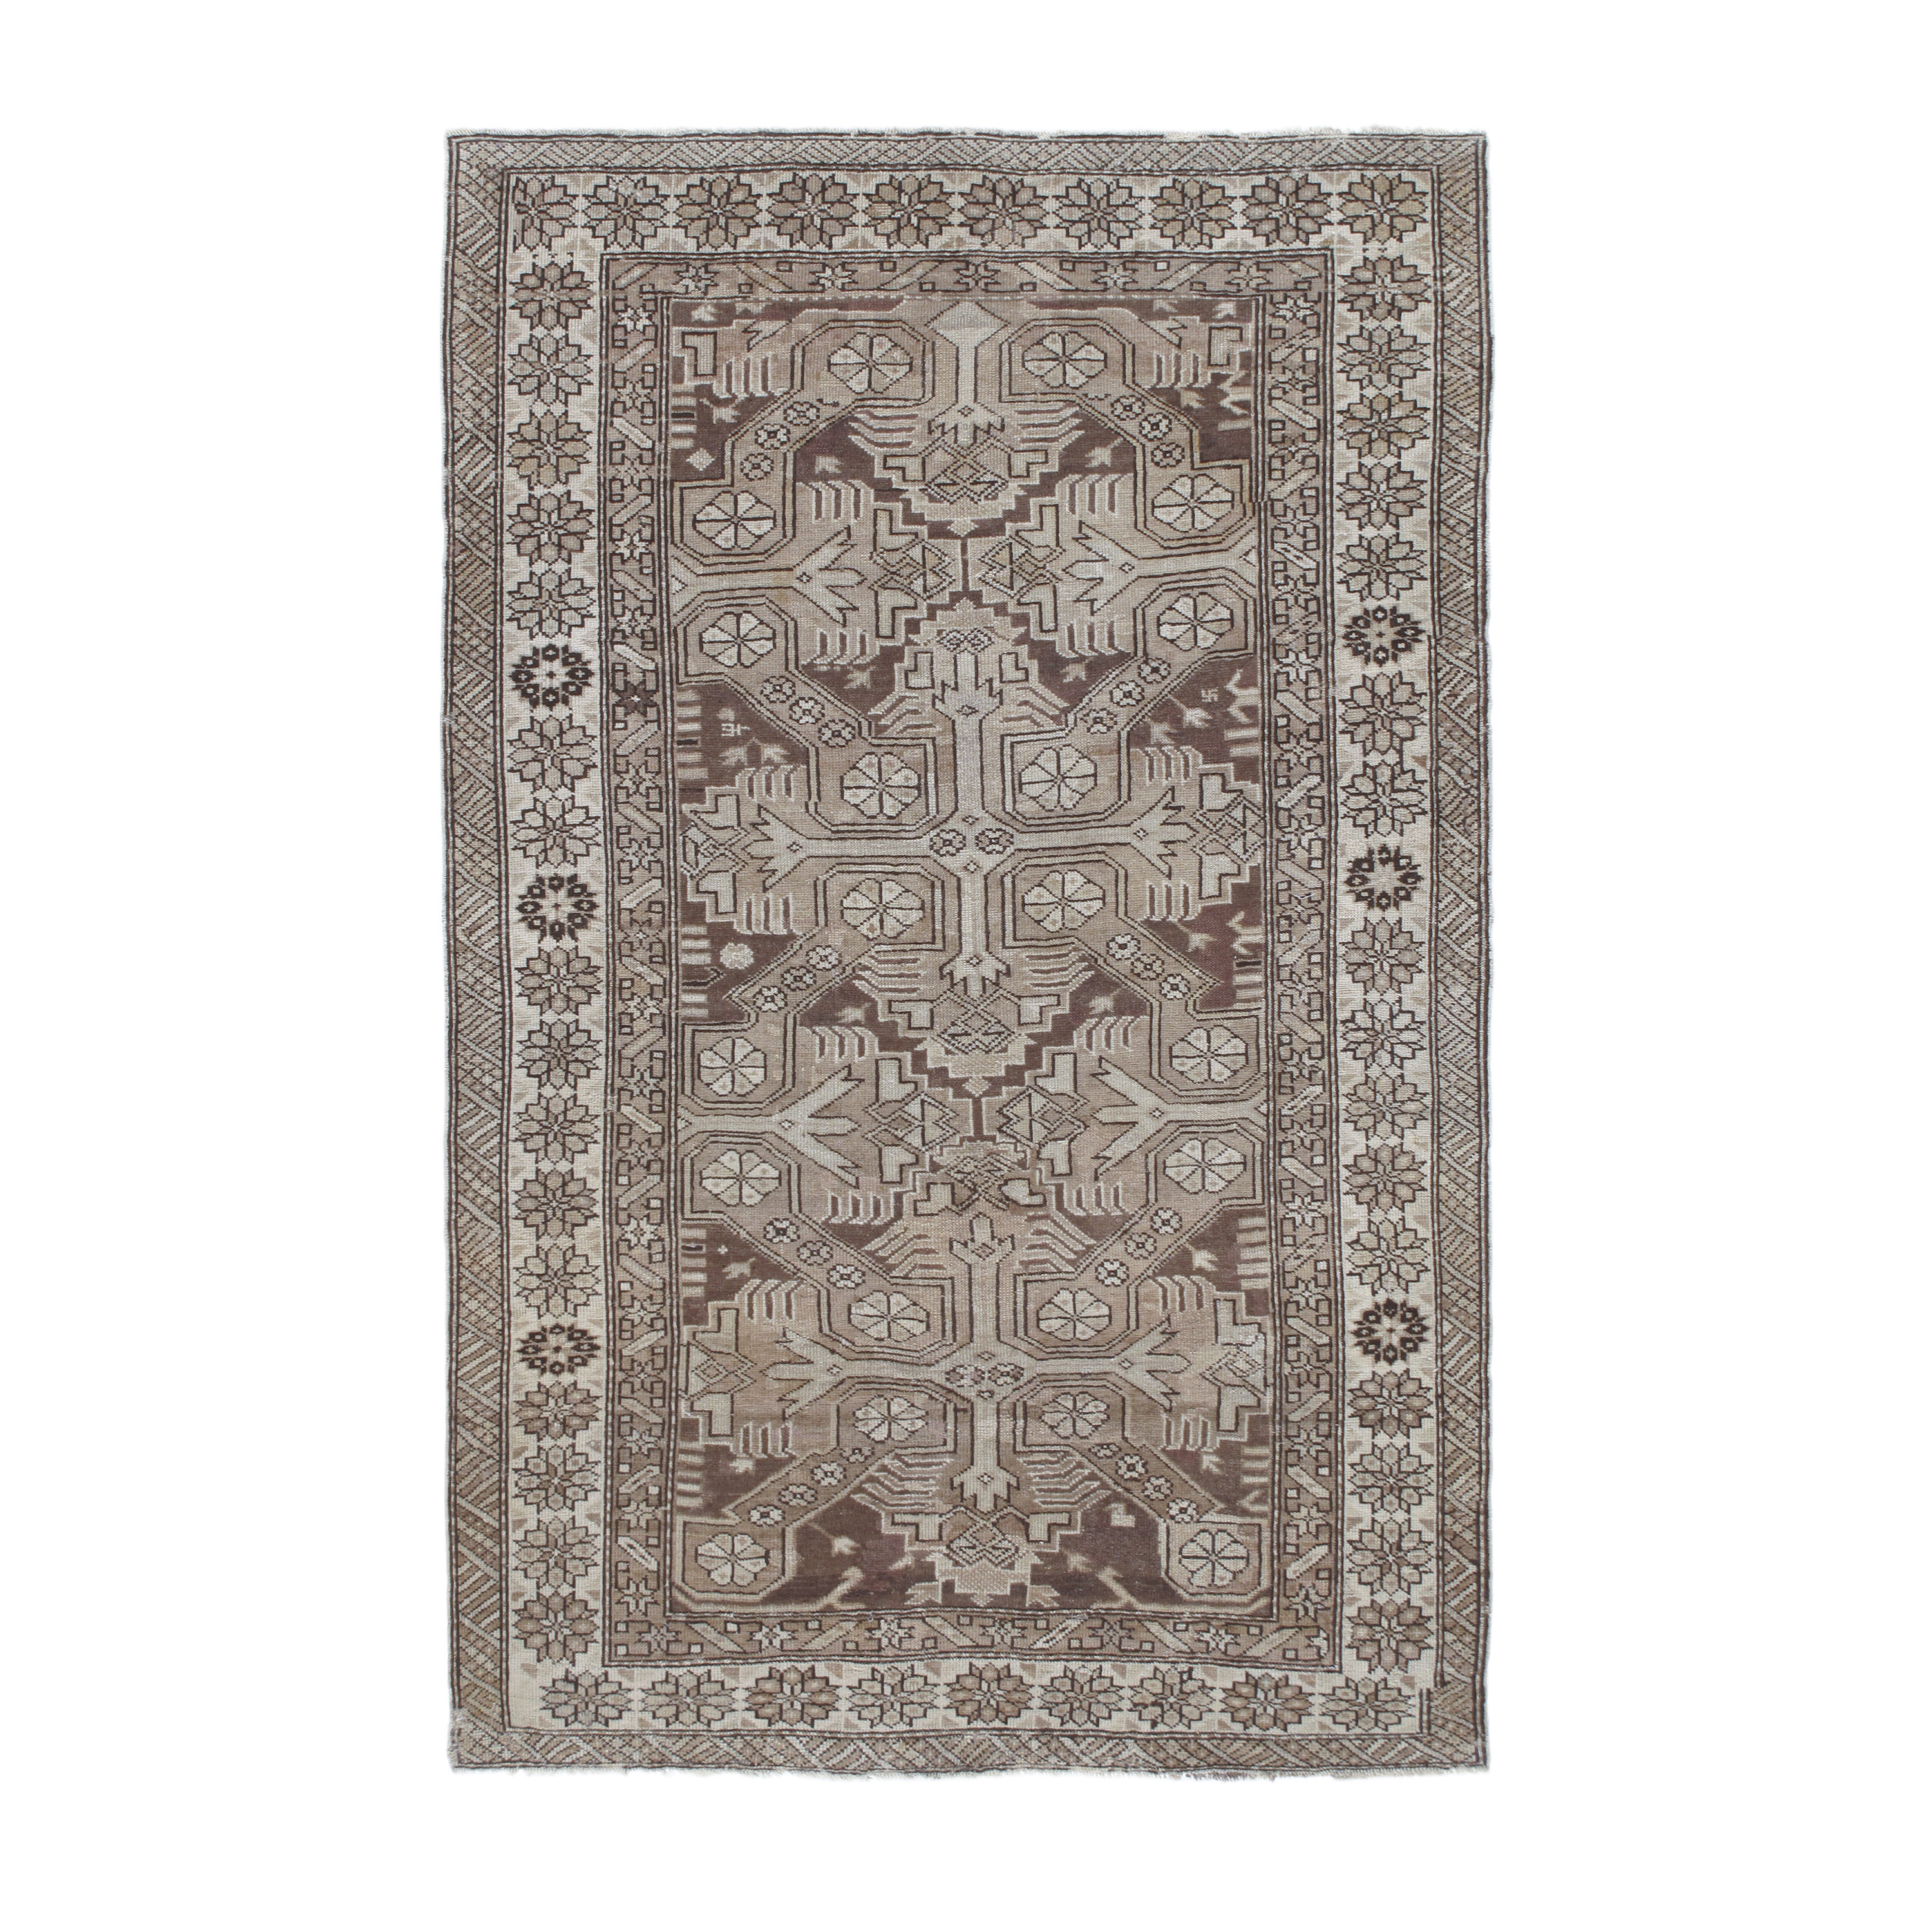 this Caucasian rug is made of 100% wool.